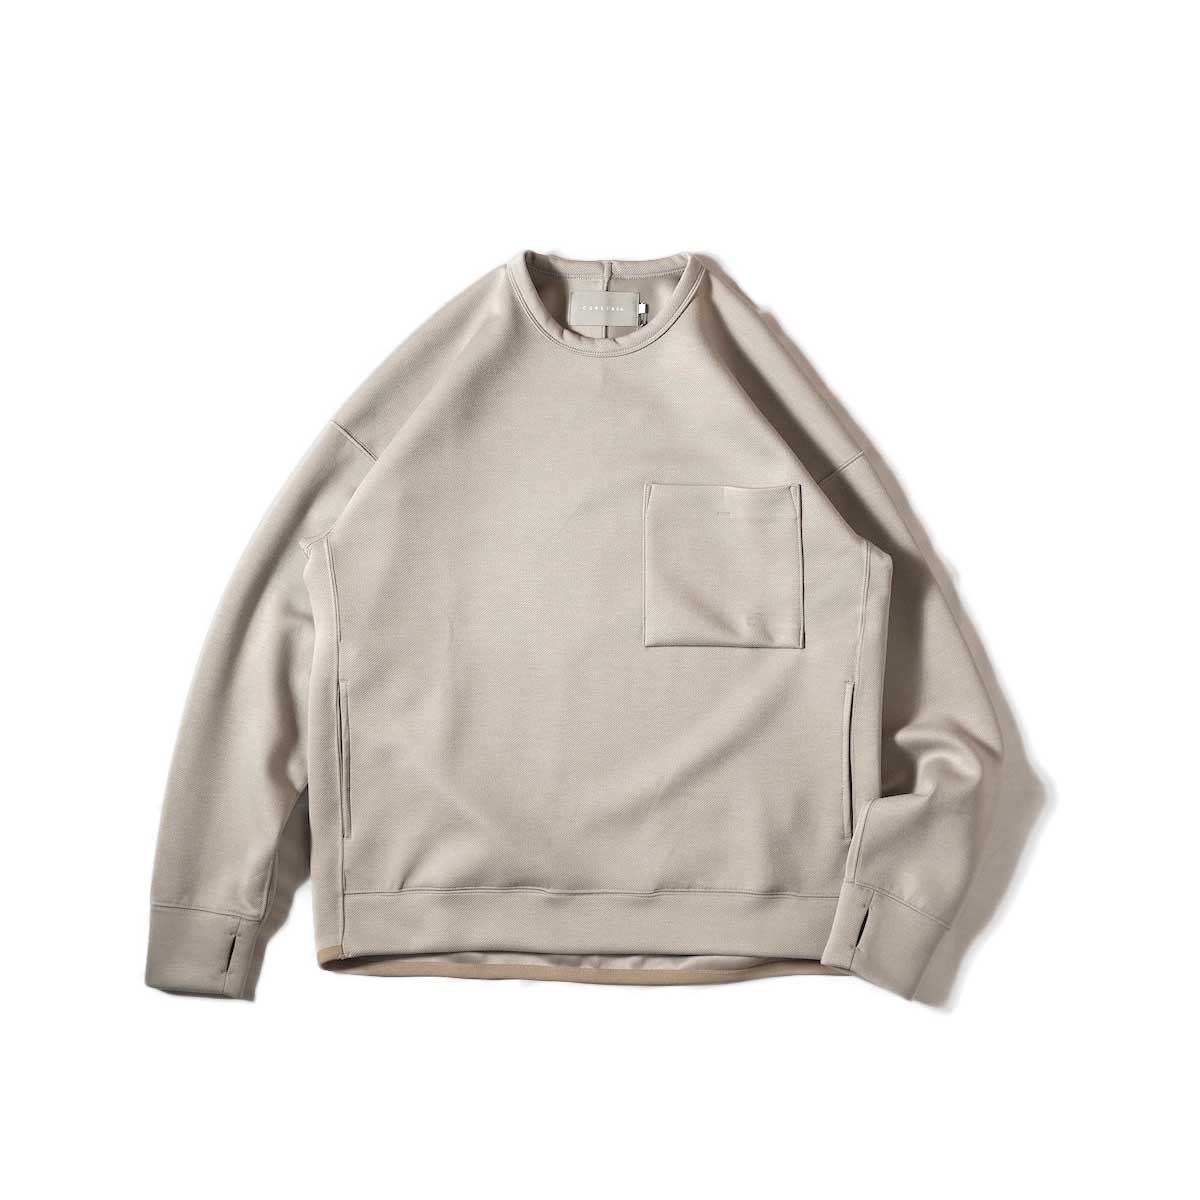 CURLY / TWILL DOUBLE JERSEY P/O (Beige)